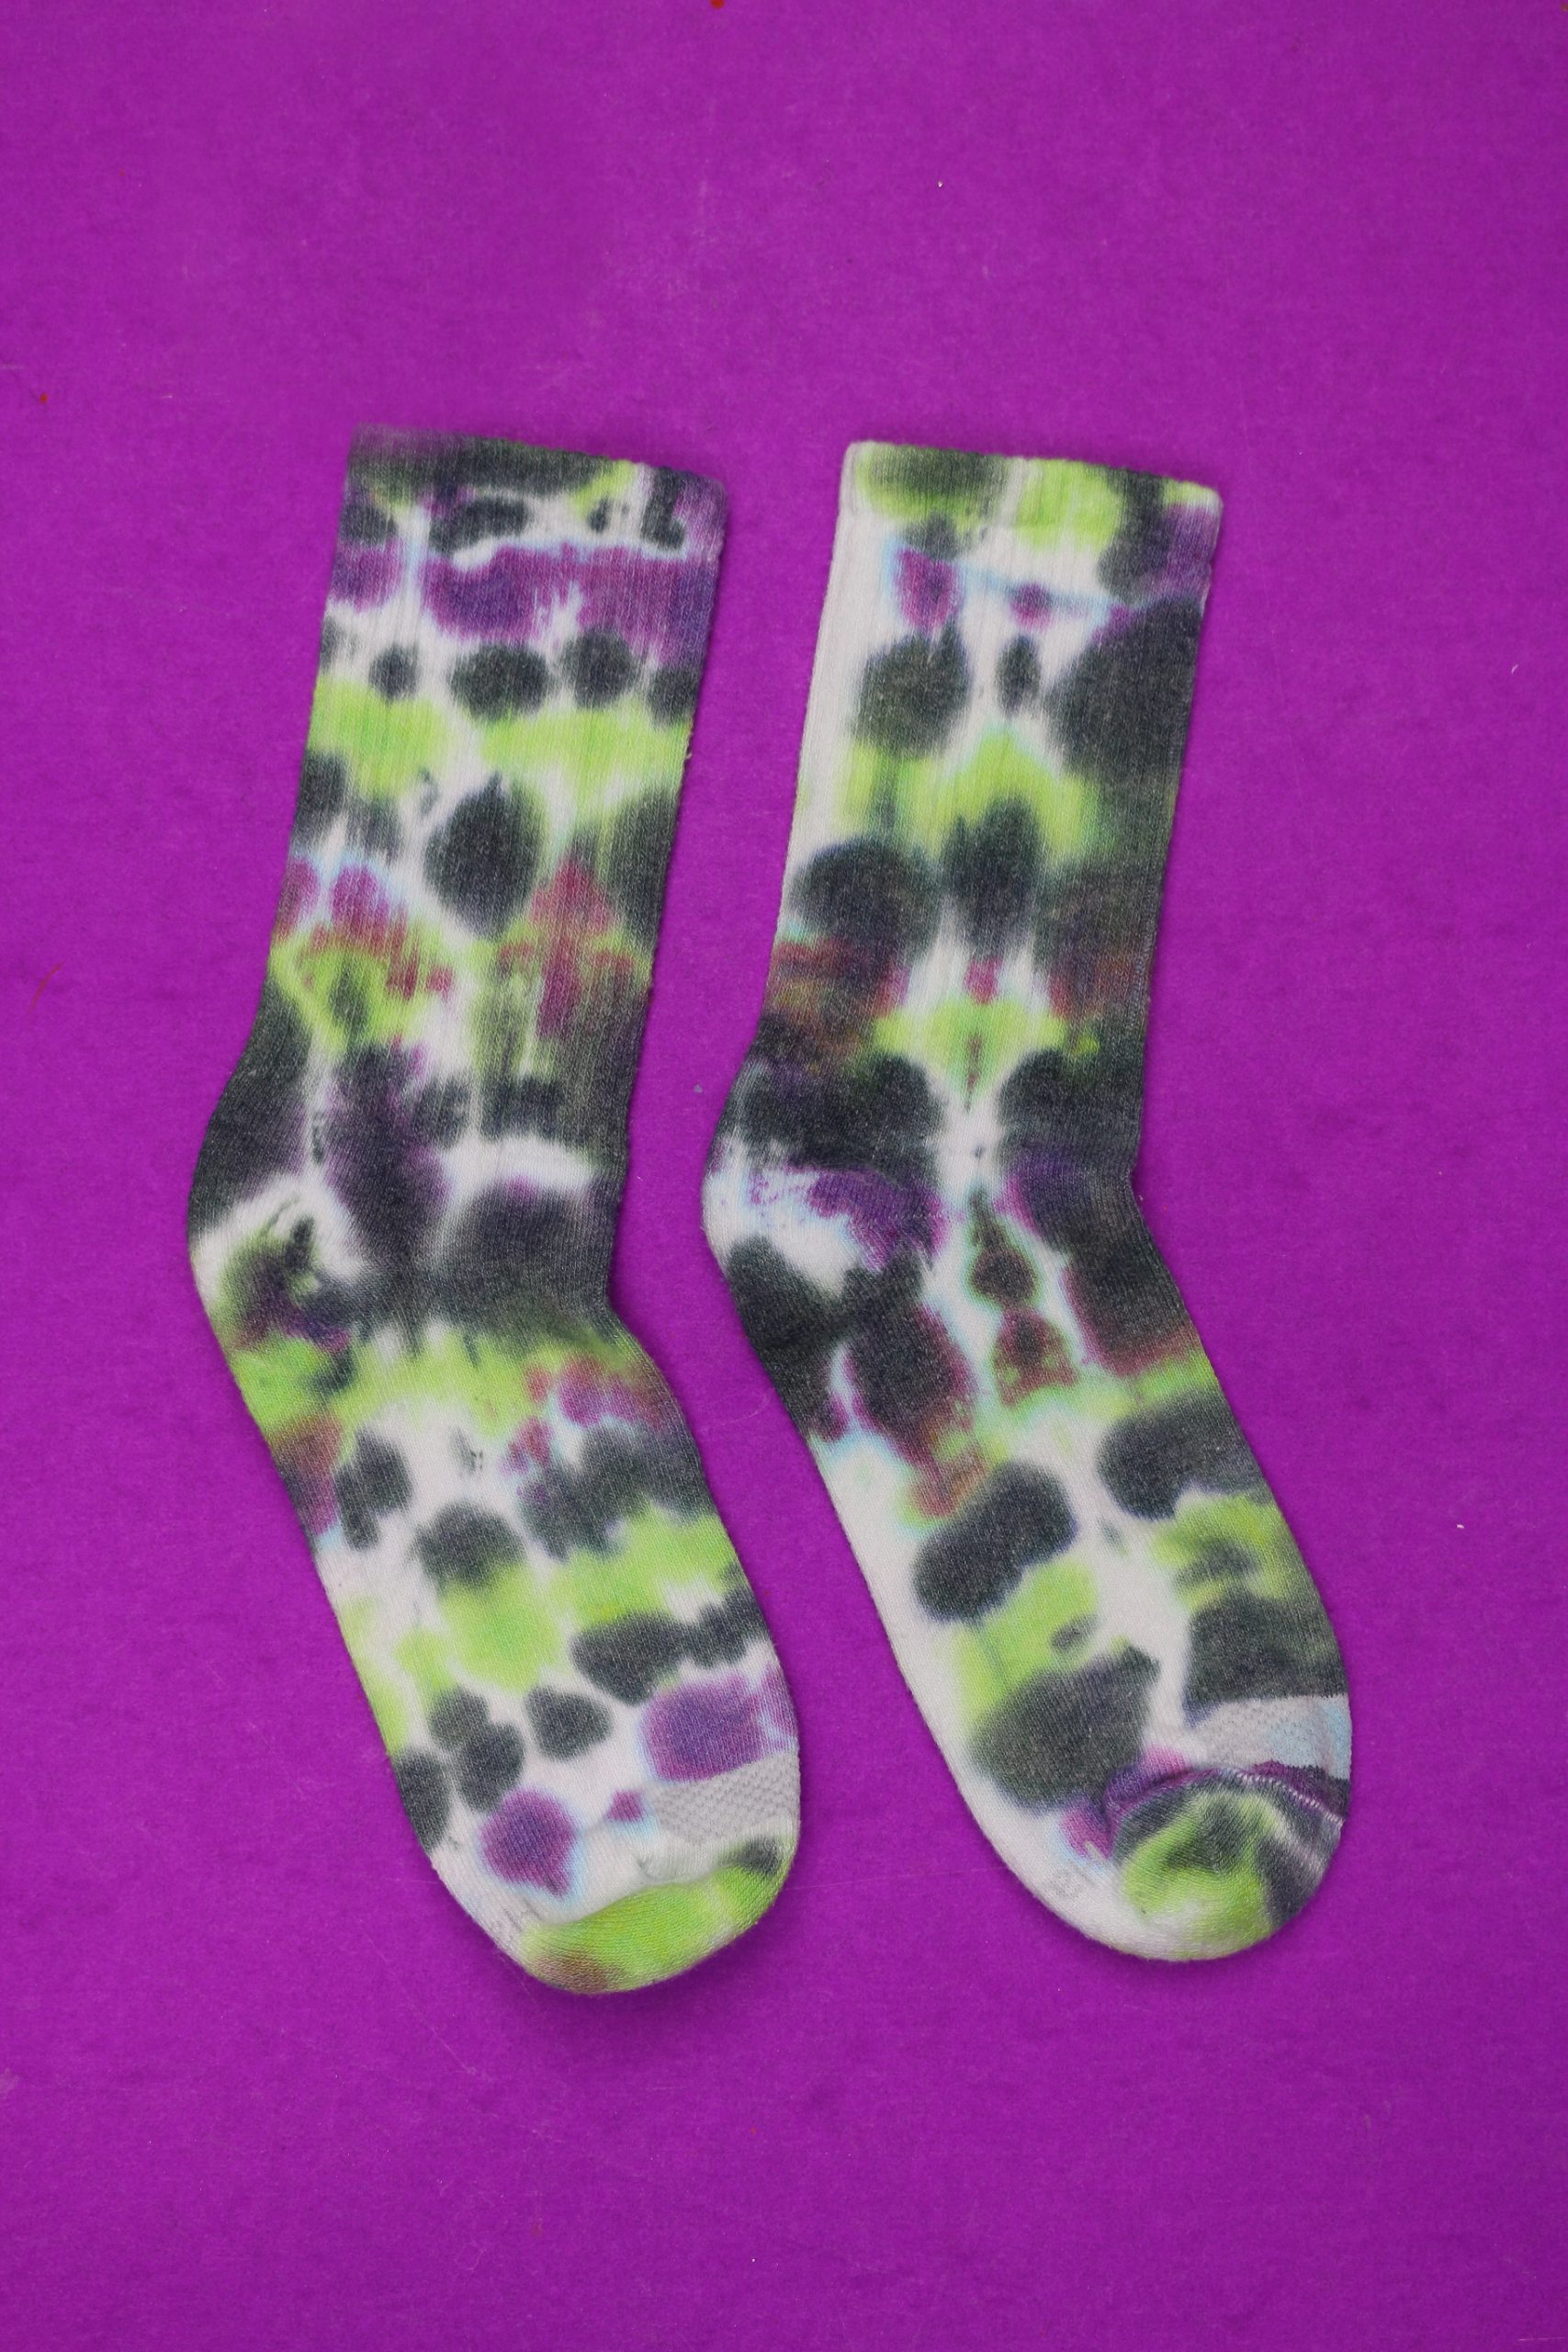 tie dyed socks on a purple background